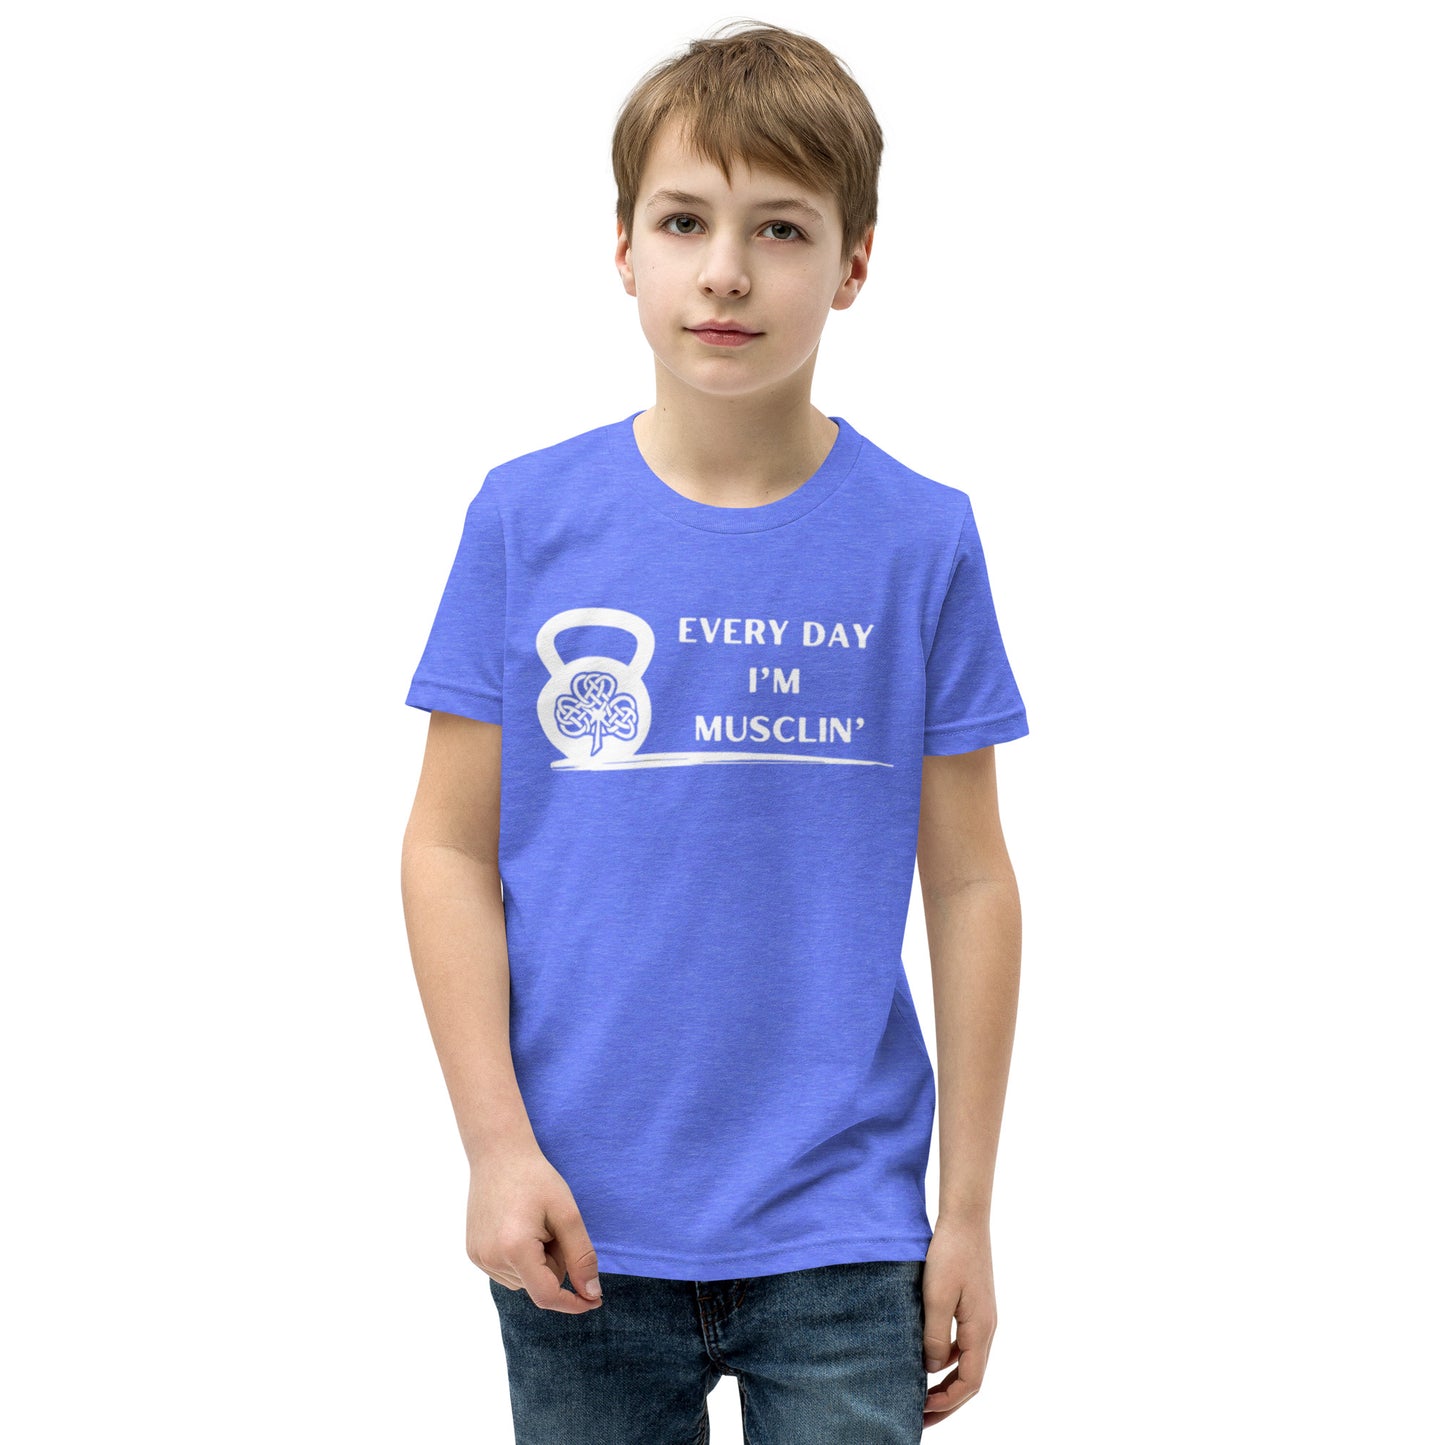 Every Day I'm Musclin' - Unisex Youth Short Sleeve T-Shirt